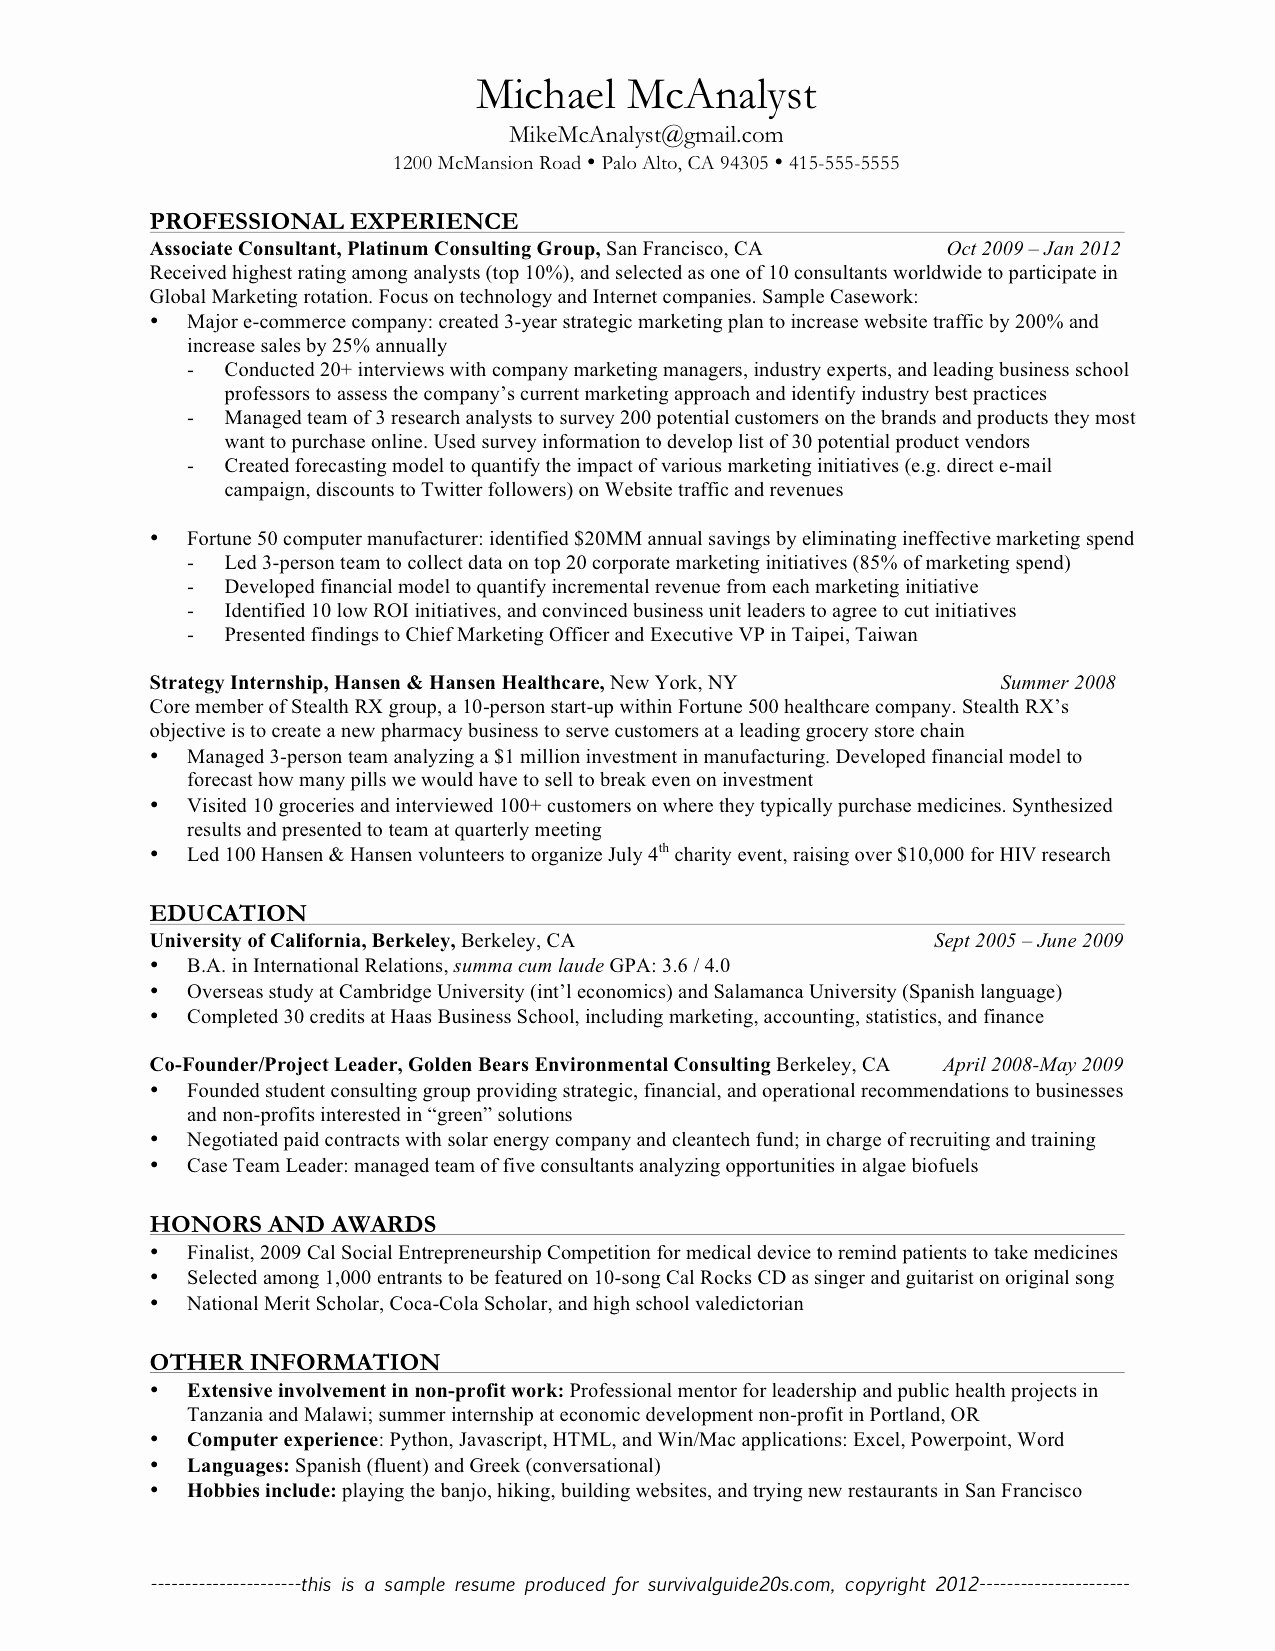 examples of great resumes best resume and cv inspiration